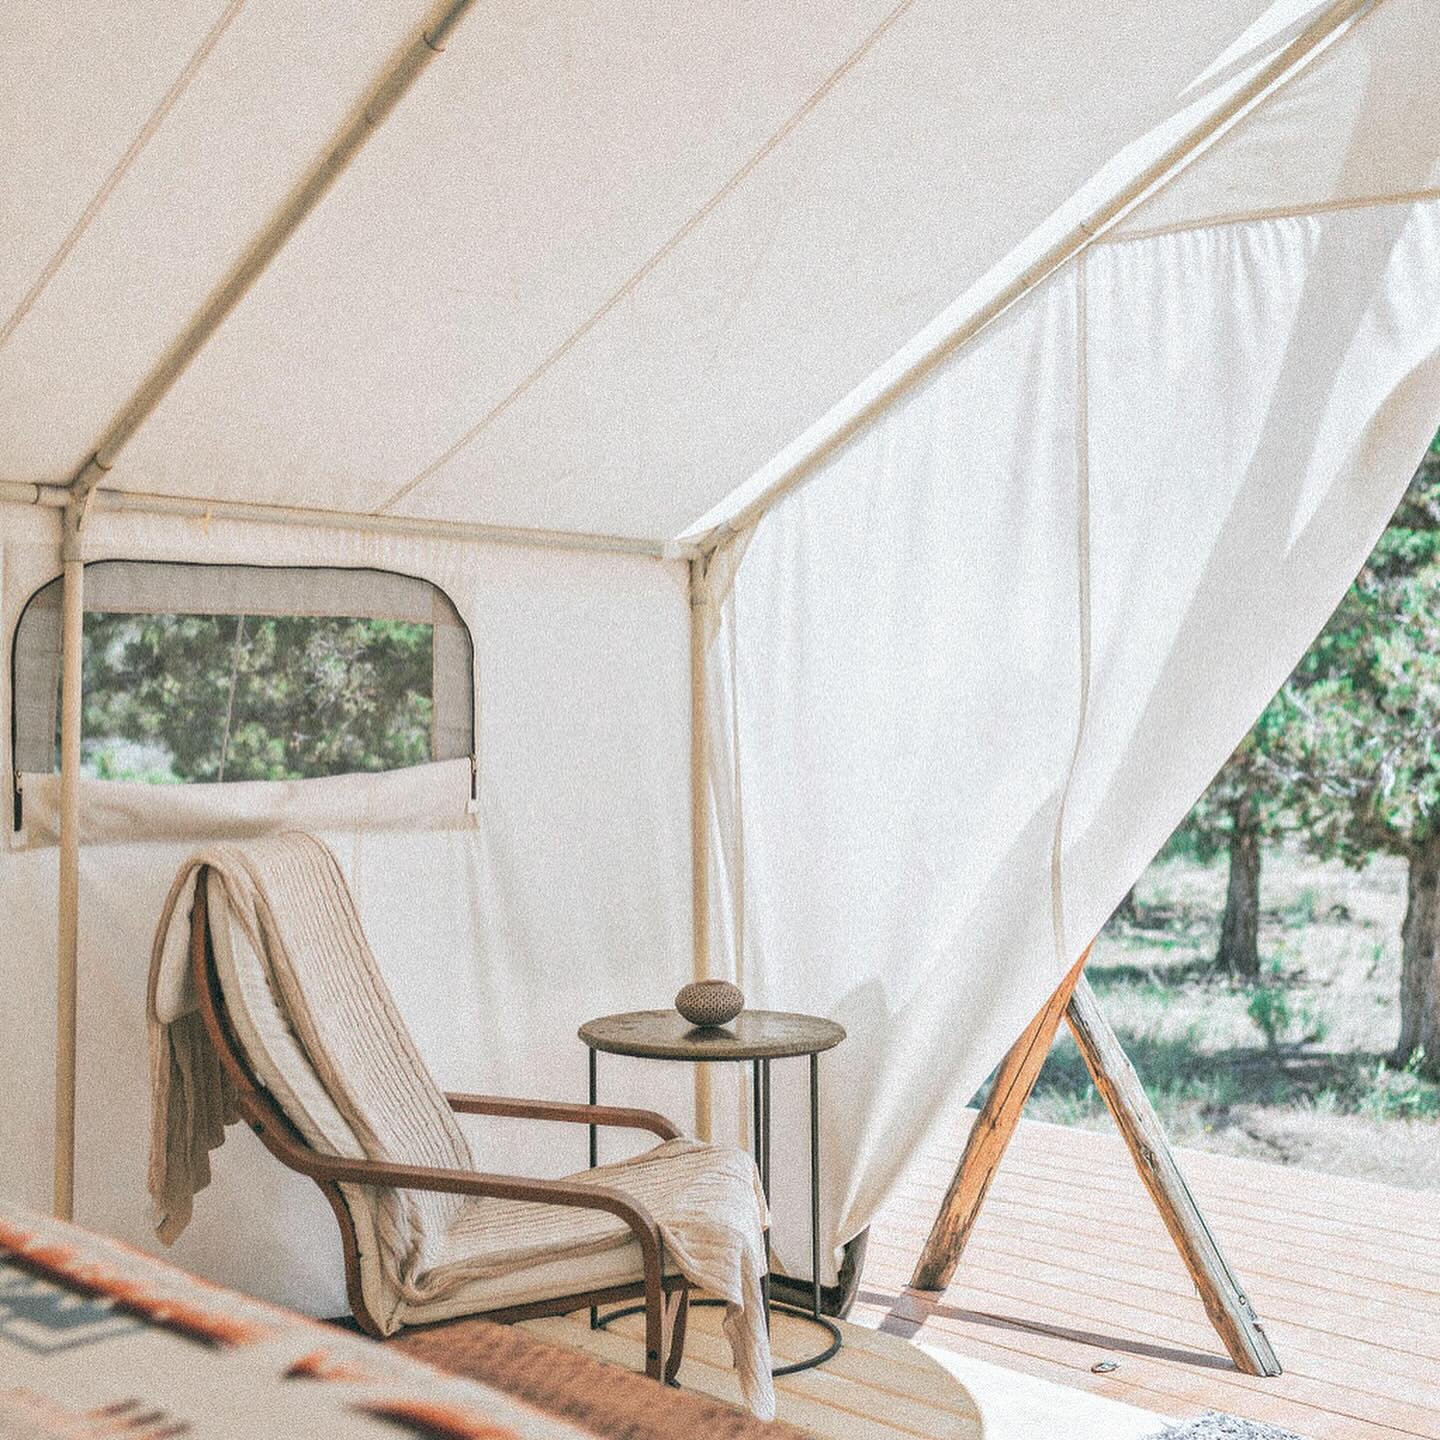 At Green Rock we offer a place for deep rest in nature with cozy and comfortable accommodation, some may call it &ldquo;glamping&rdquo; 🥰 did we mention our star gazing windows in all of our tents? If you want to experience our glamping magic we hav